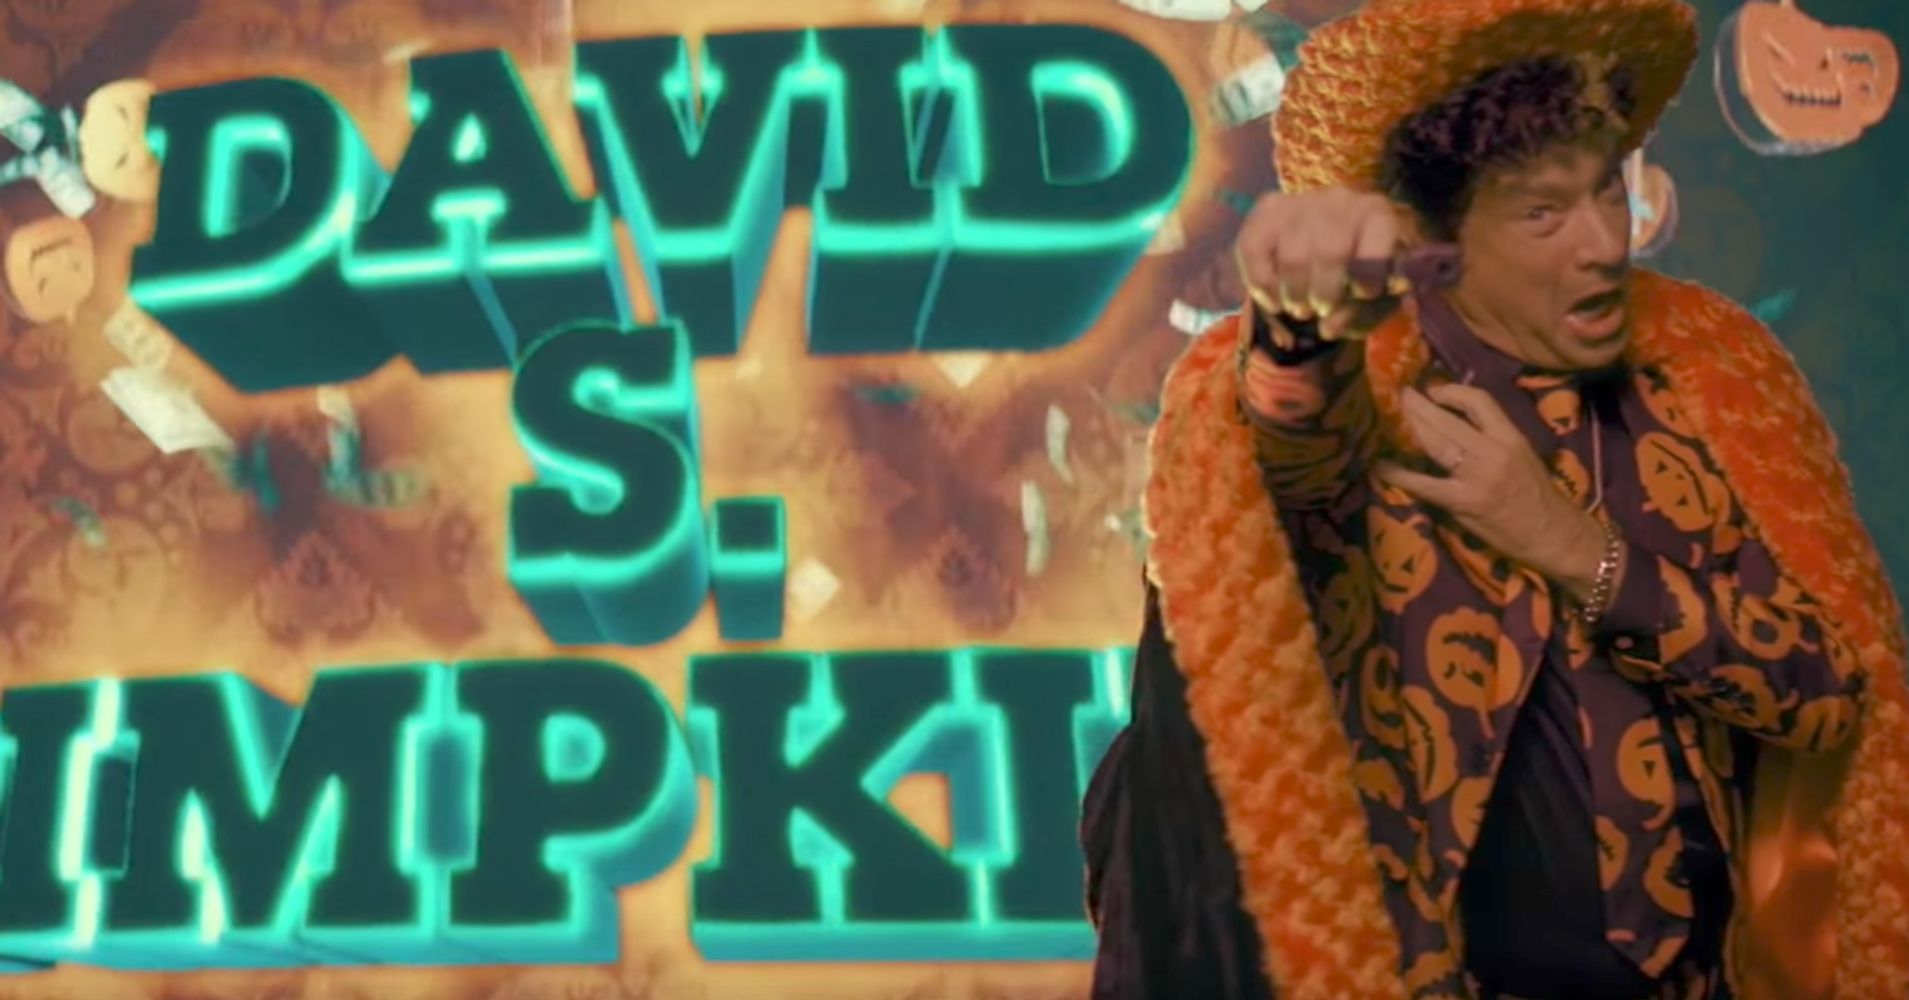 David S Pumpkins Returned To Snl And We Have Questions Huffpost 